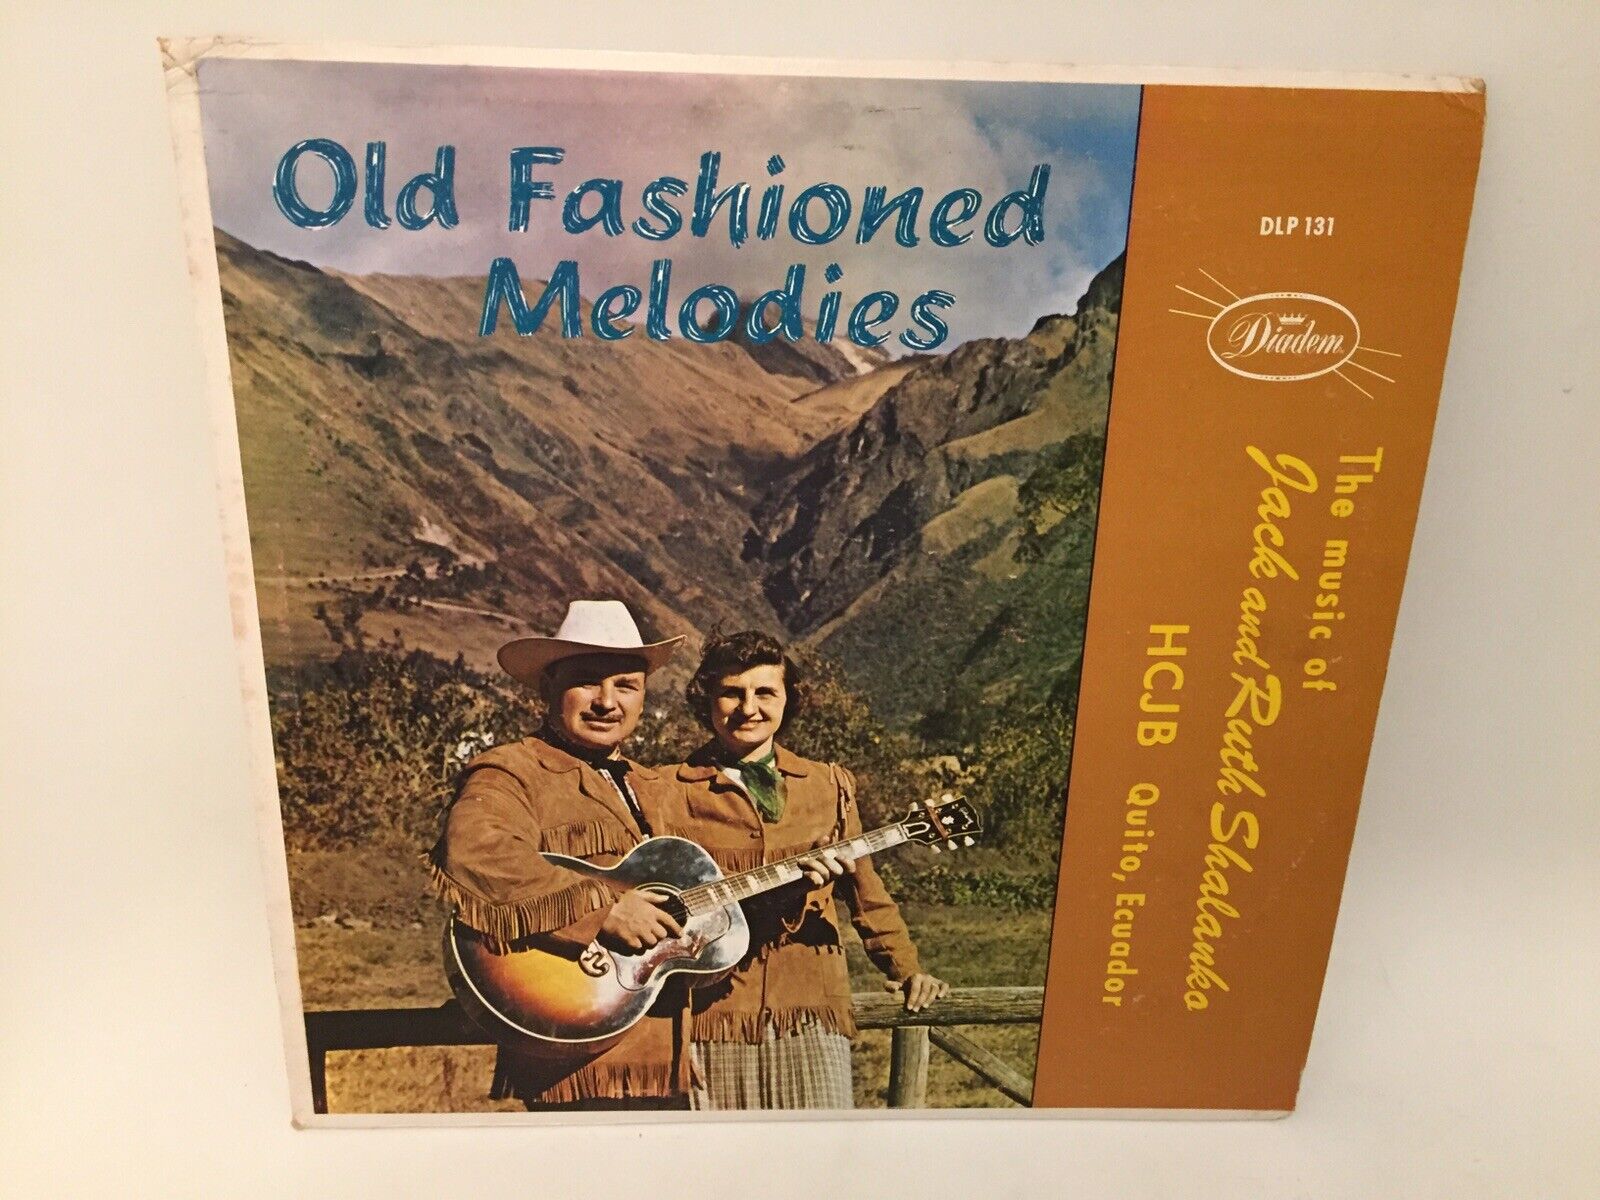 The Music Of Jack And Ruth Shalanko Old Fashioned Melodies Vinyl LP Record RARE 